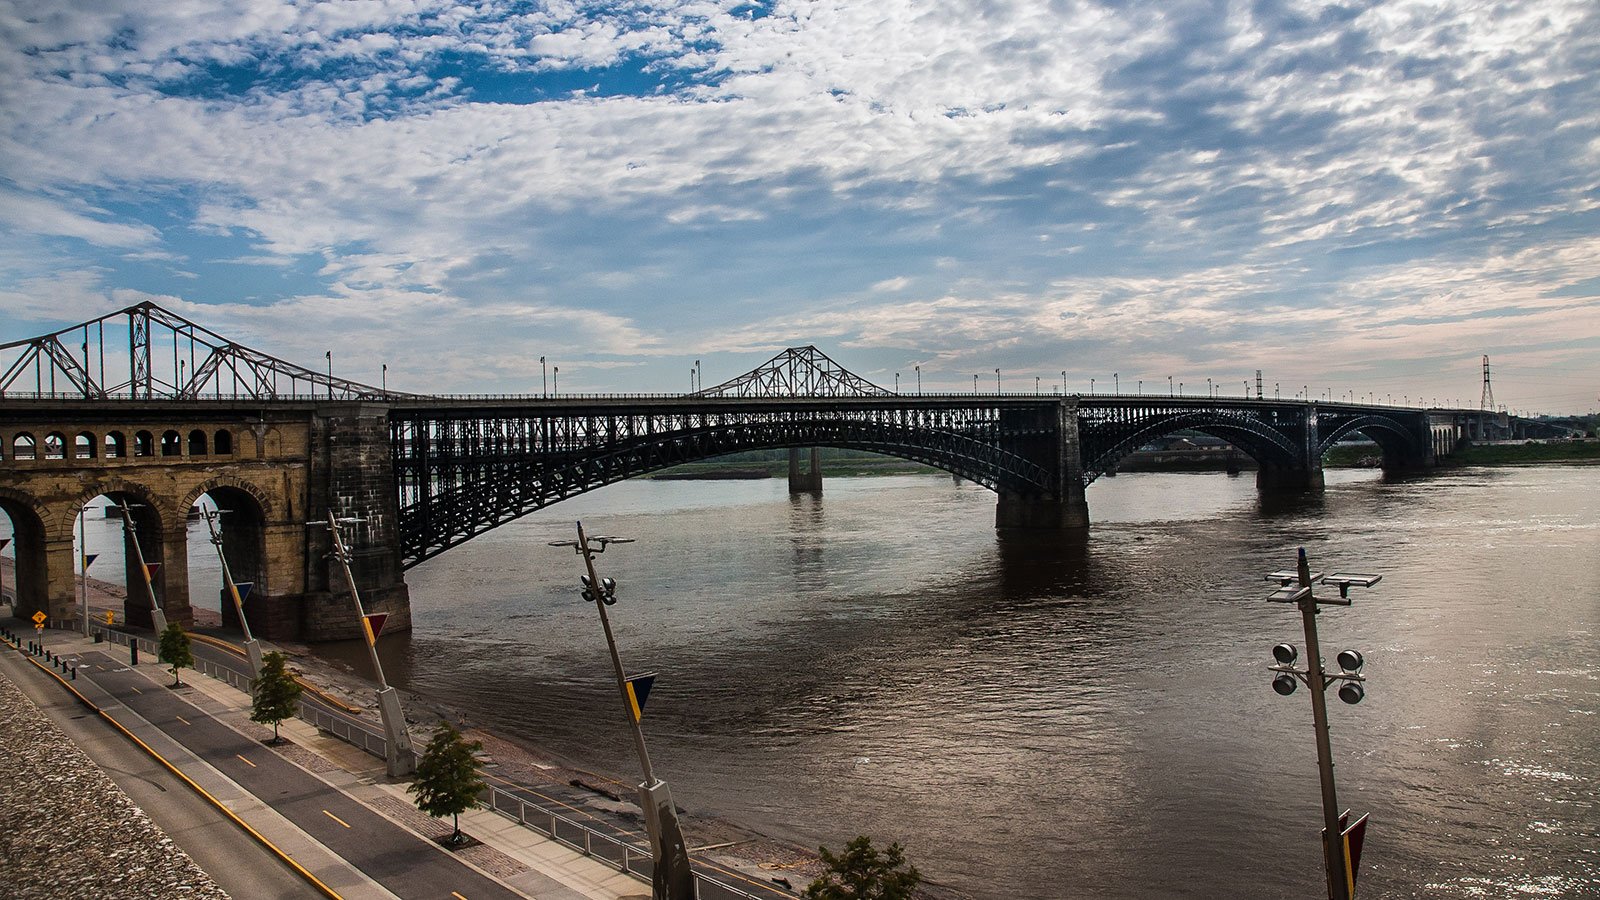 The full span of the Eads Bridge, an arch bridge over the Mississippi River connecting St. Louis, Missouri, and East St. Louis, Illinois, 2017